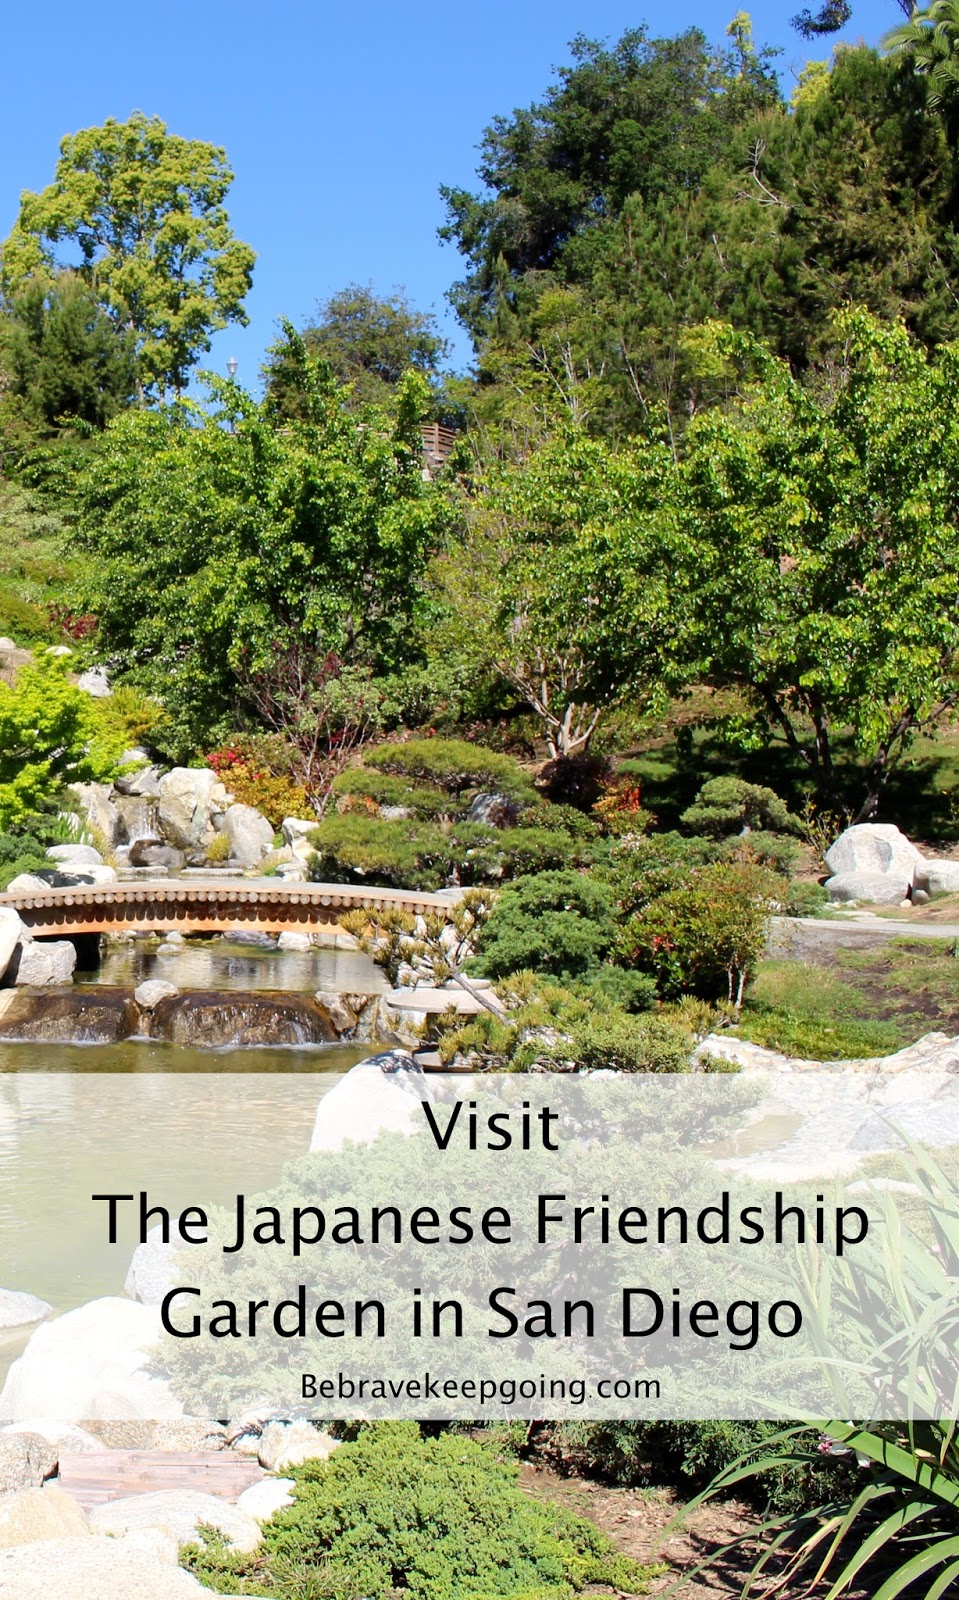 Be Brave, Keep Going: Our Visit To The Japanese Friendship ...